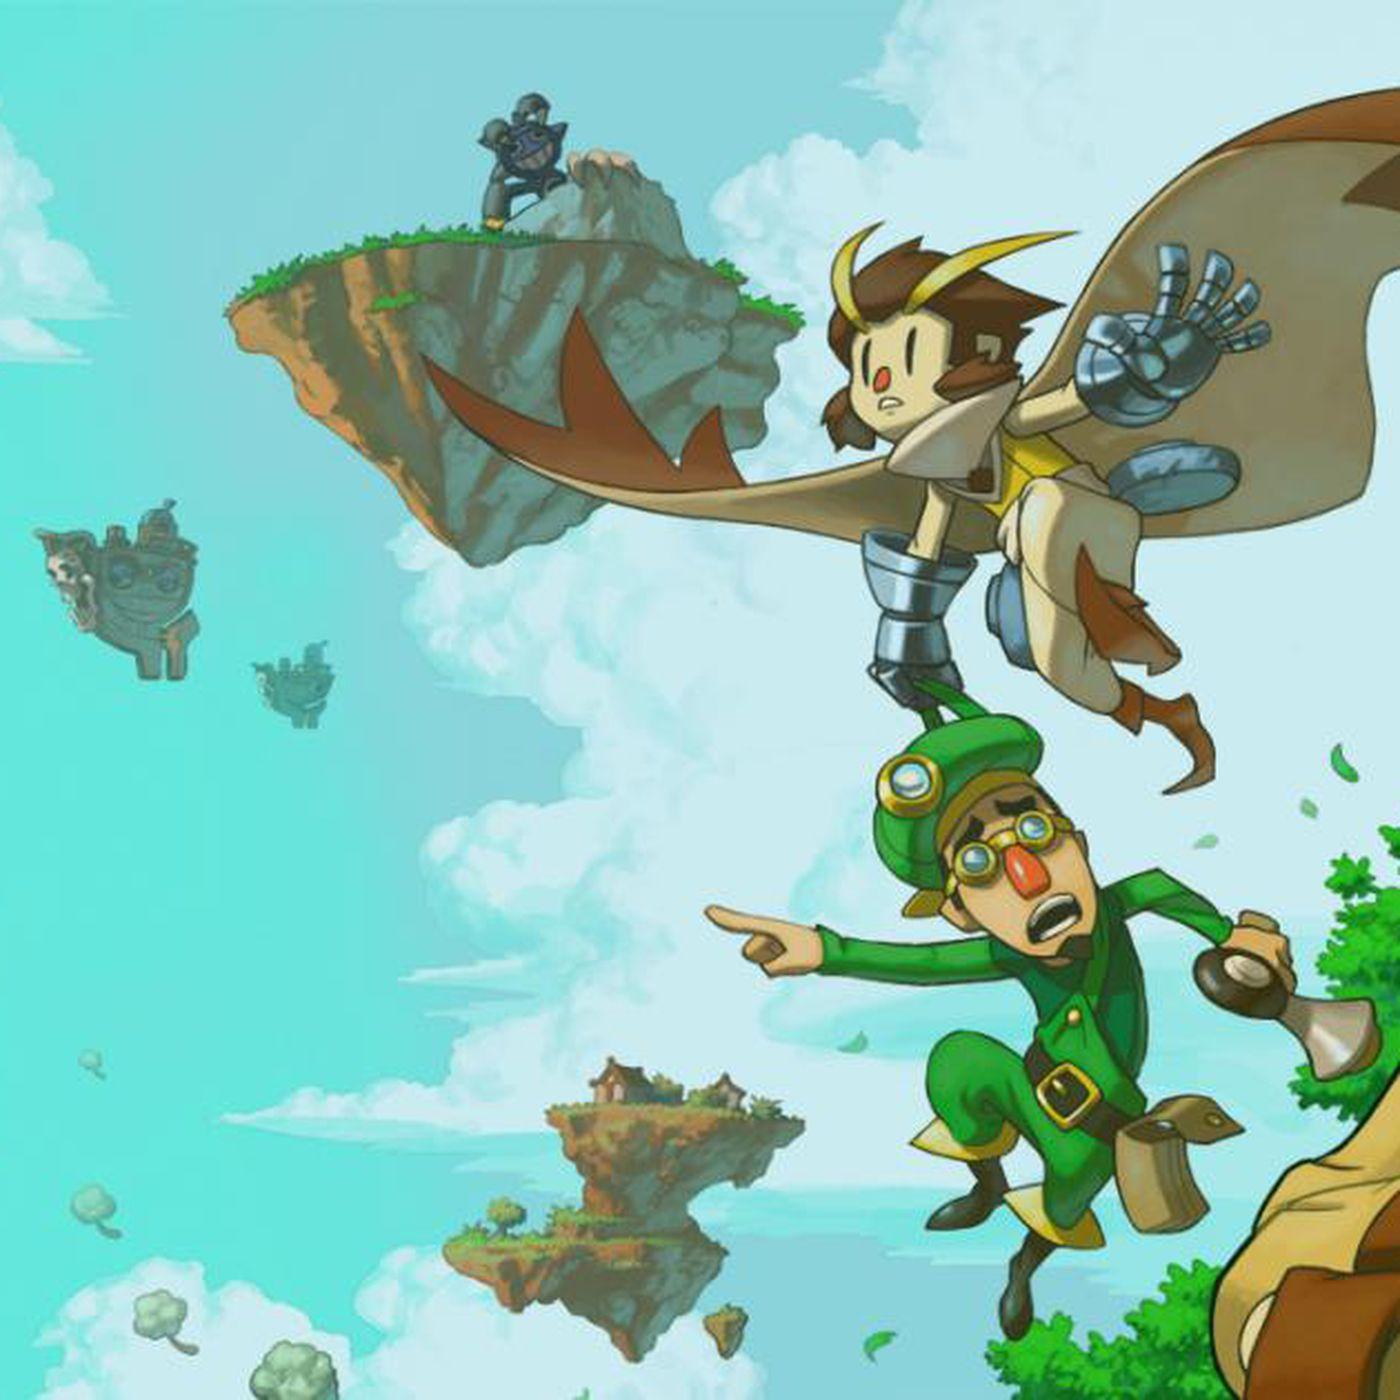 Owlboy's very ugly Switch icon leads to backlash